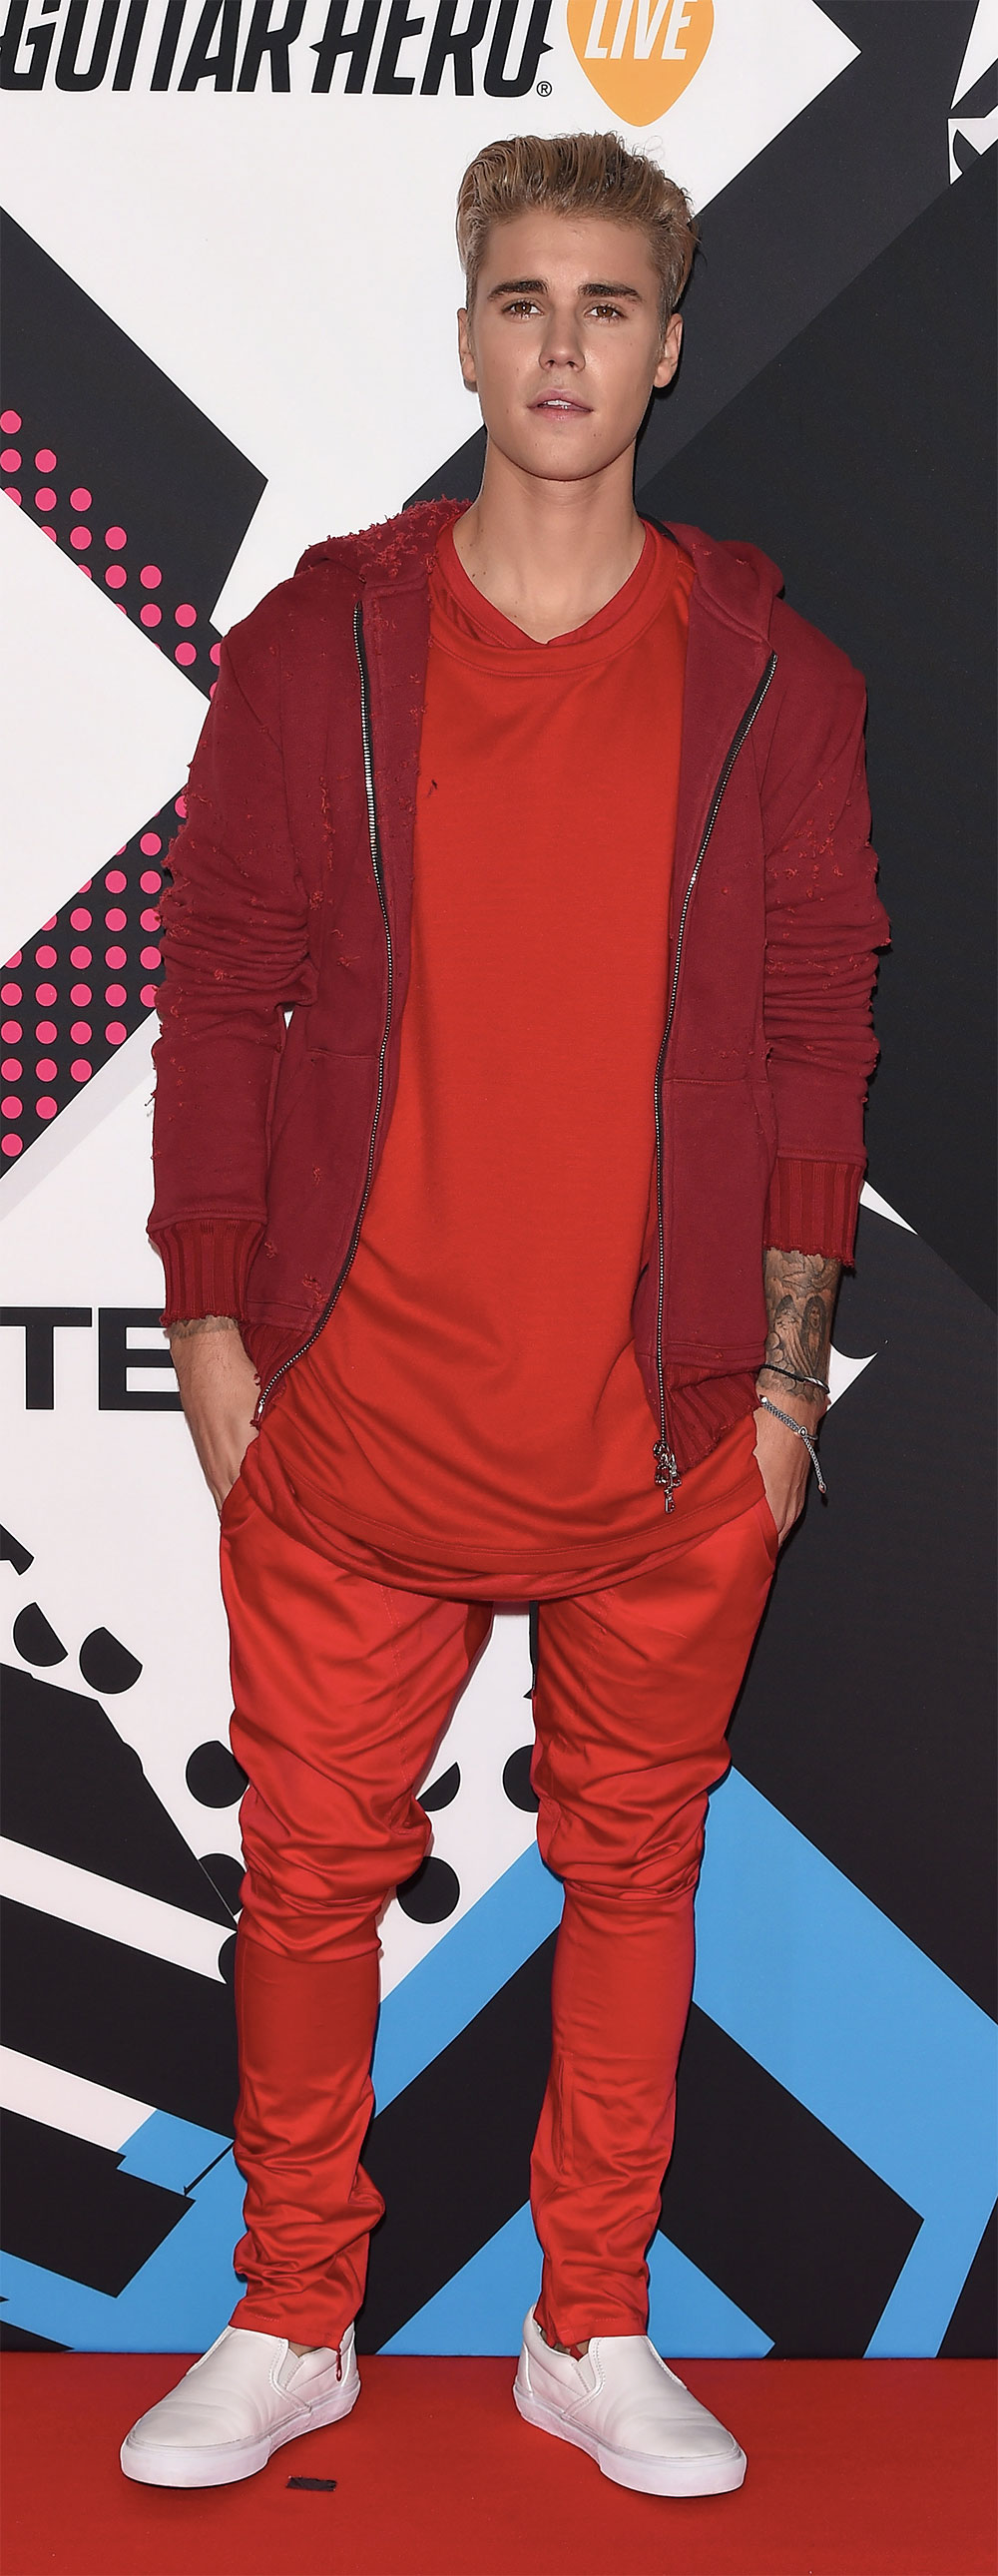 justin bieber monochrome outfit